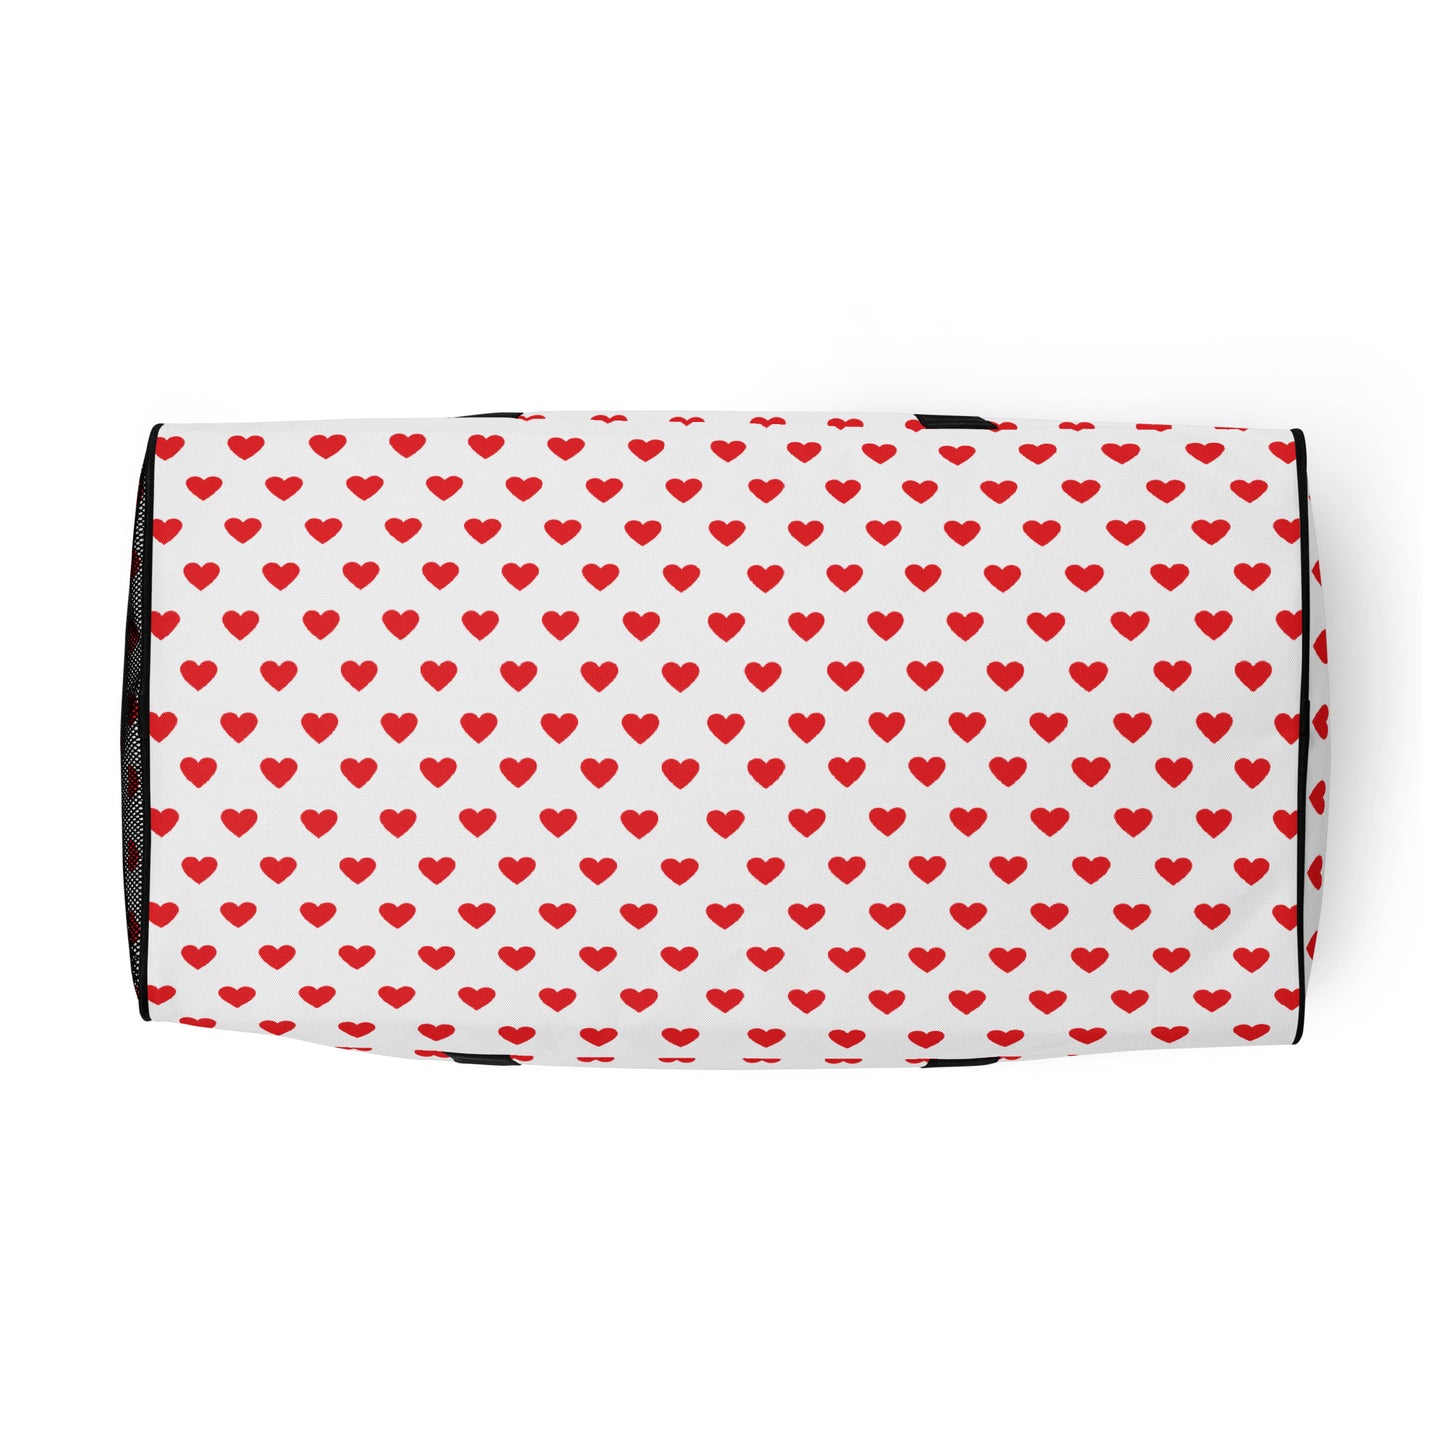 Heart Tile - Inspired By Harry Styles - Sustainably Made  Duffle bag